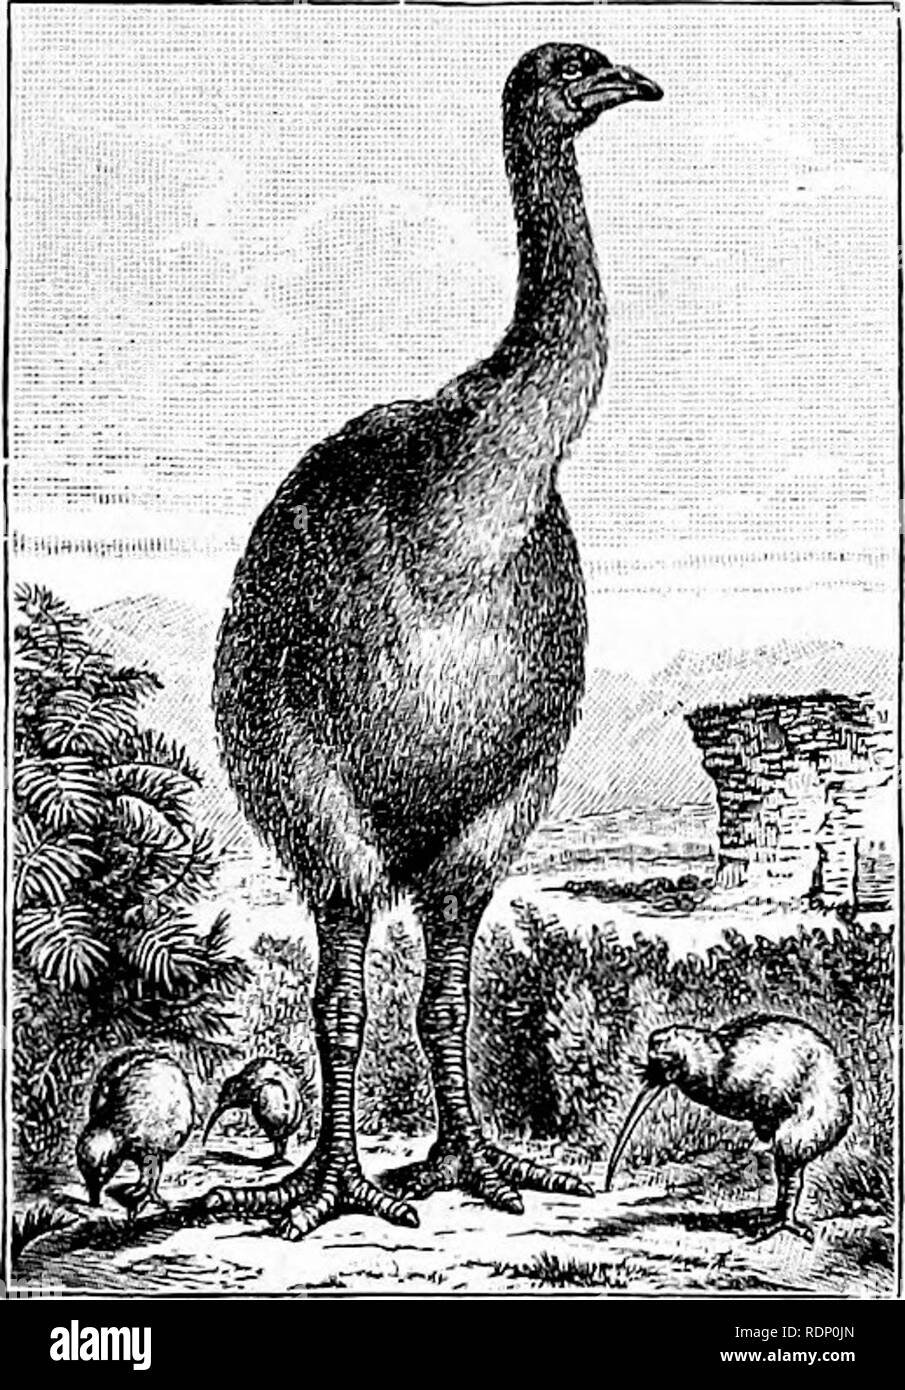 . Outlines of zoology. Zoology. Fig. 2.—Phenacodus, a primitive extinct Mammal.—After Cope. (&lt;r) Prolotheria, Ornithodelphia, or Monotremes — the egg-laying duckmole (Ornithorhynchus), Echidna, and Proechidna. Birds.—There can be no hesitation as to the class which ranks next to Mammals. For Birds are in most respects as highly developed as Mammals, though in a different direc- tion. They are character- ised by their feathers and wings, and many other adaptations for flight, by their high temperature, by the frequent spongi- ness and hollowness of their bones, by the tend- ency to fusion in Stock Photo